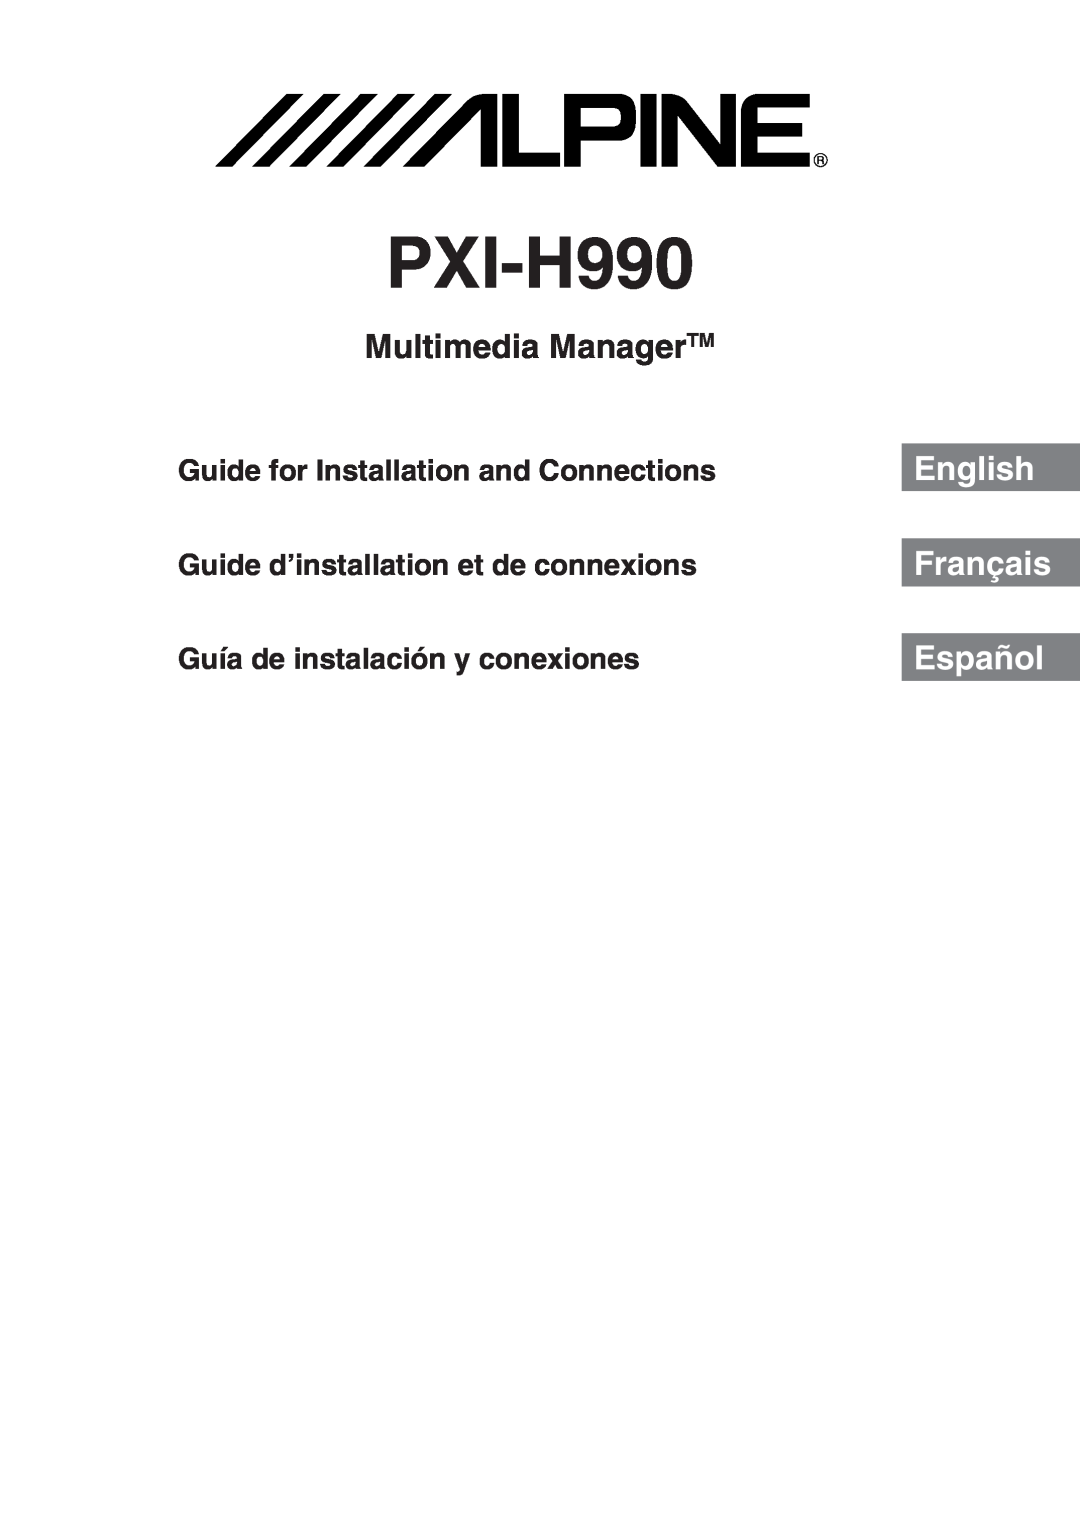 Alpine PXI-H990 manual Multimedia ManagerTM, English, Français, Español, Guide for Installation and Connections 